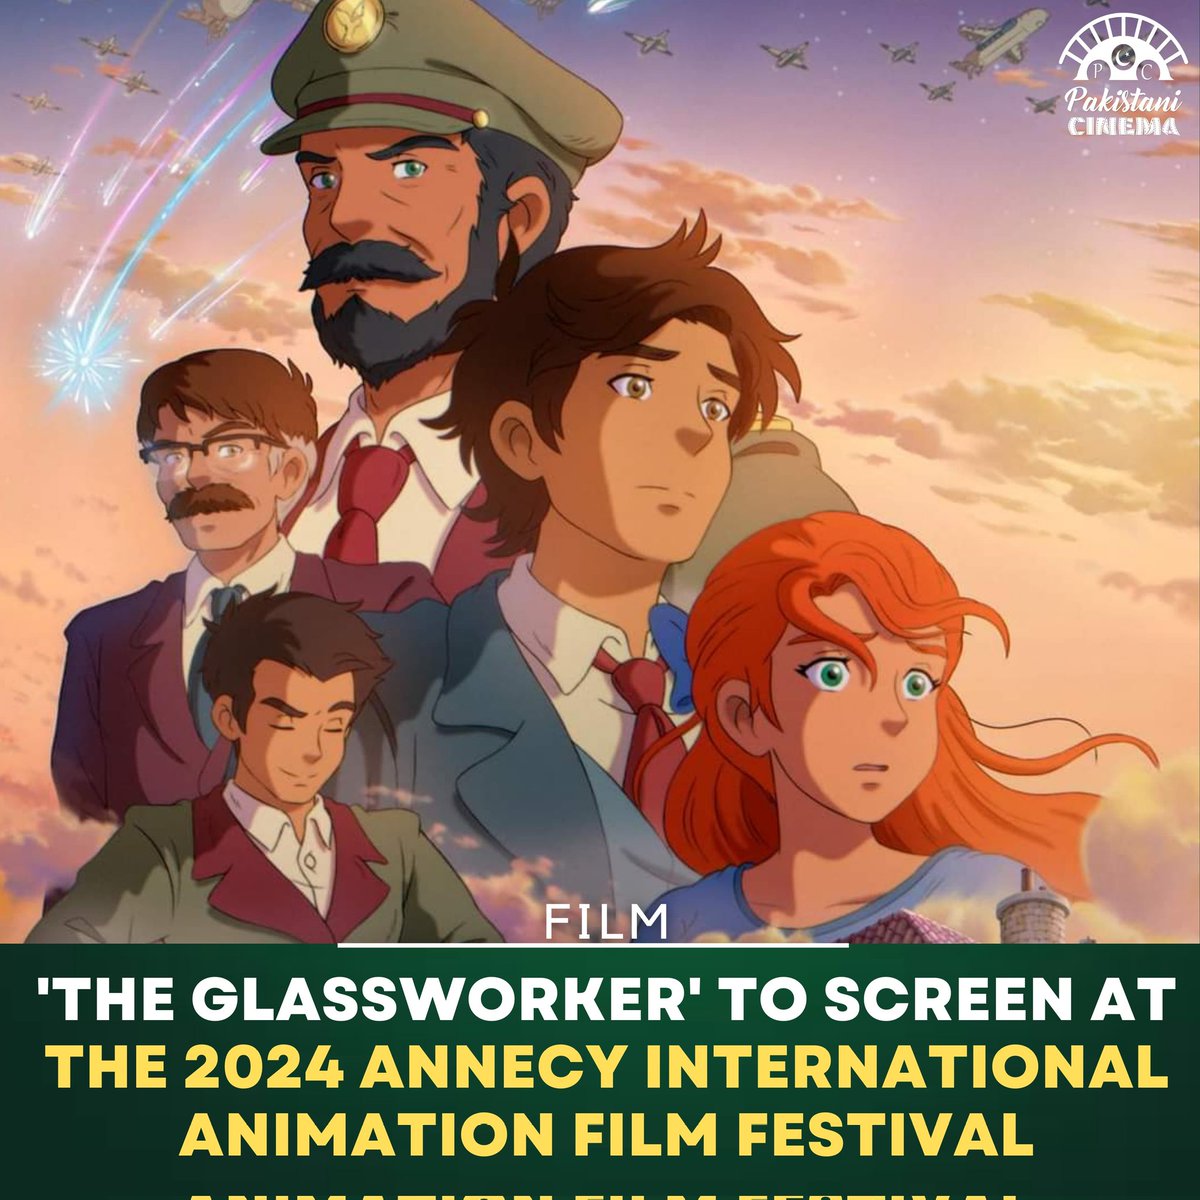 #TheGlassworker  will be screened alongside films from huge animation studios like “#Moana2” from Disney, “#InsideOut2” from Pixar, and “#DespicableMe4” from Illumination. 

Read more here:pakistanicinema.net/2024/04/26/the…